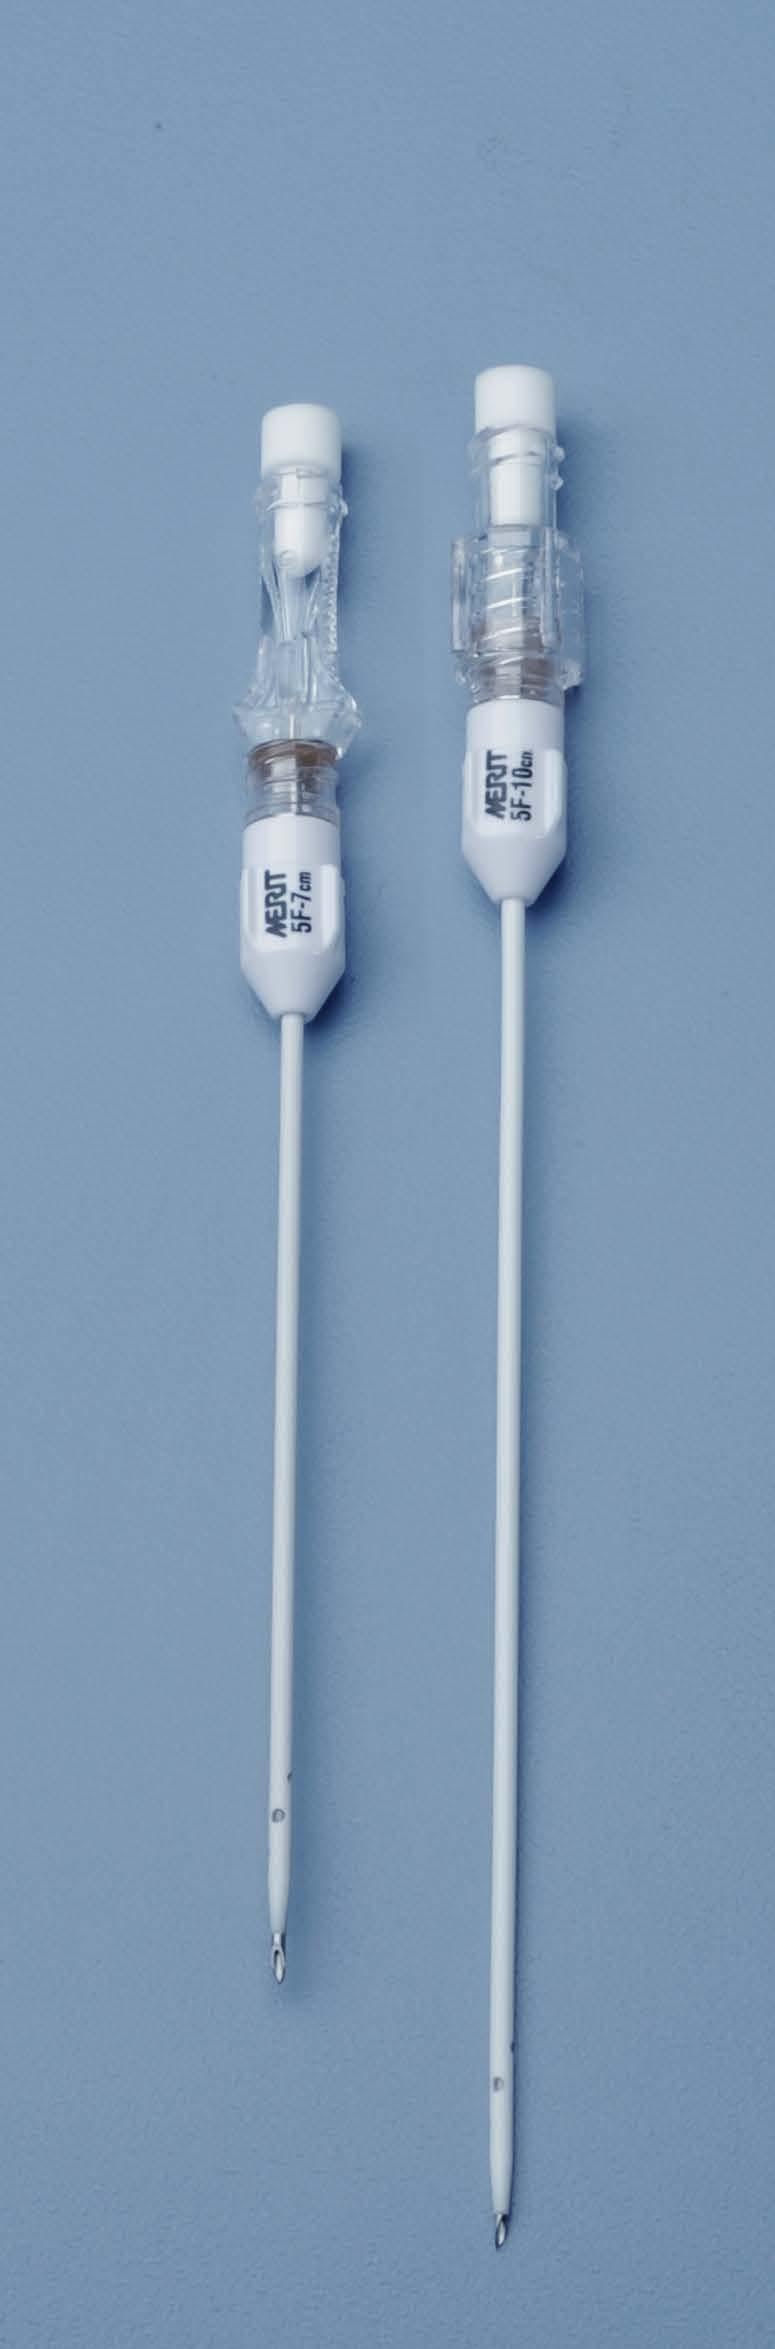 Valved One-Step Centesis Catheter The self-closing valve prevents air infiltration and fluid leakage. When activated with a luer, the valve fully opens to allow maximum flow.